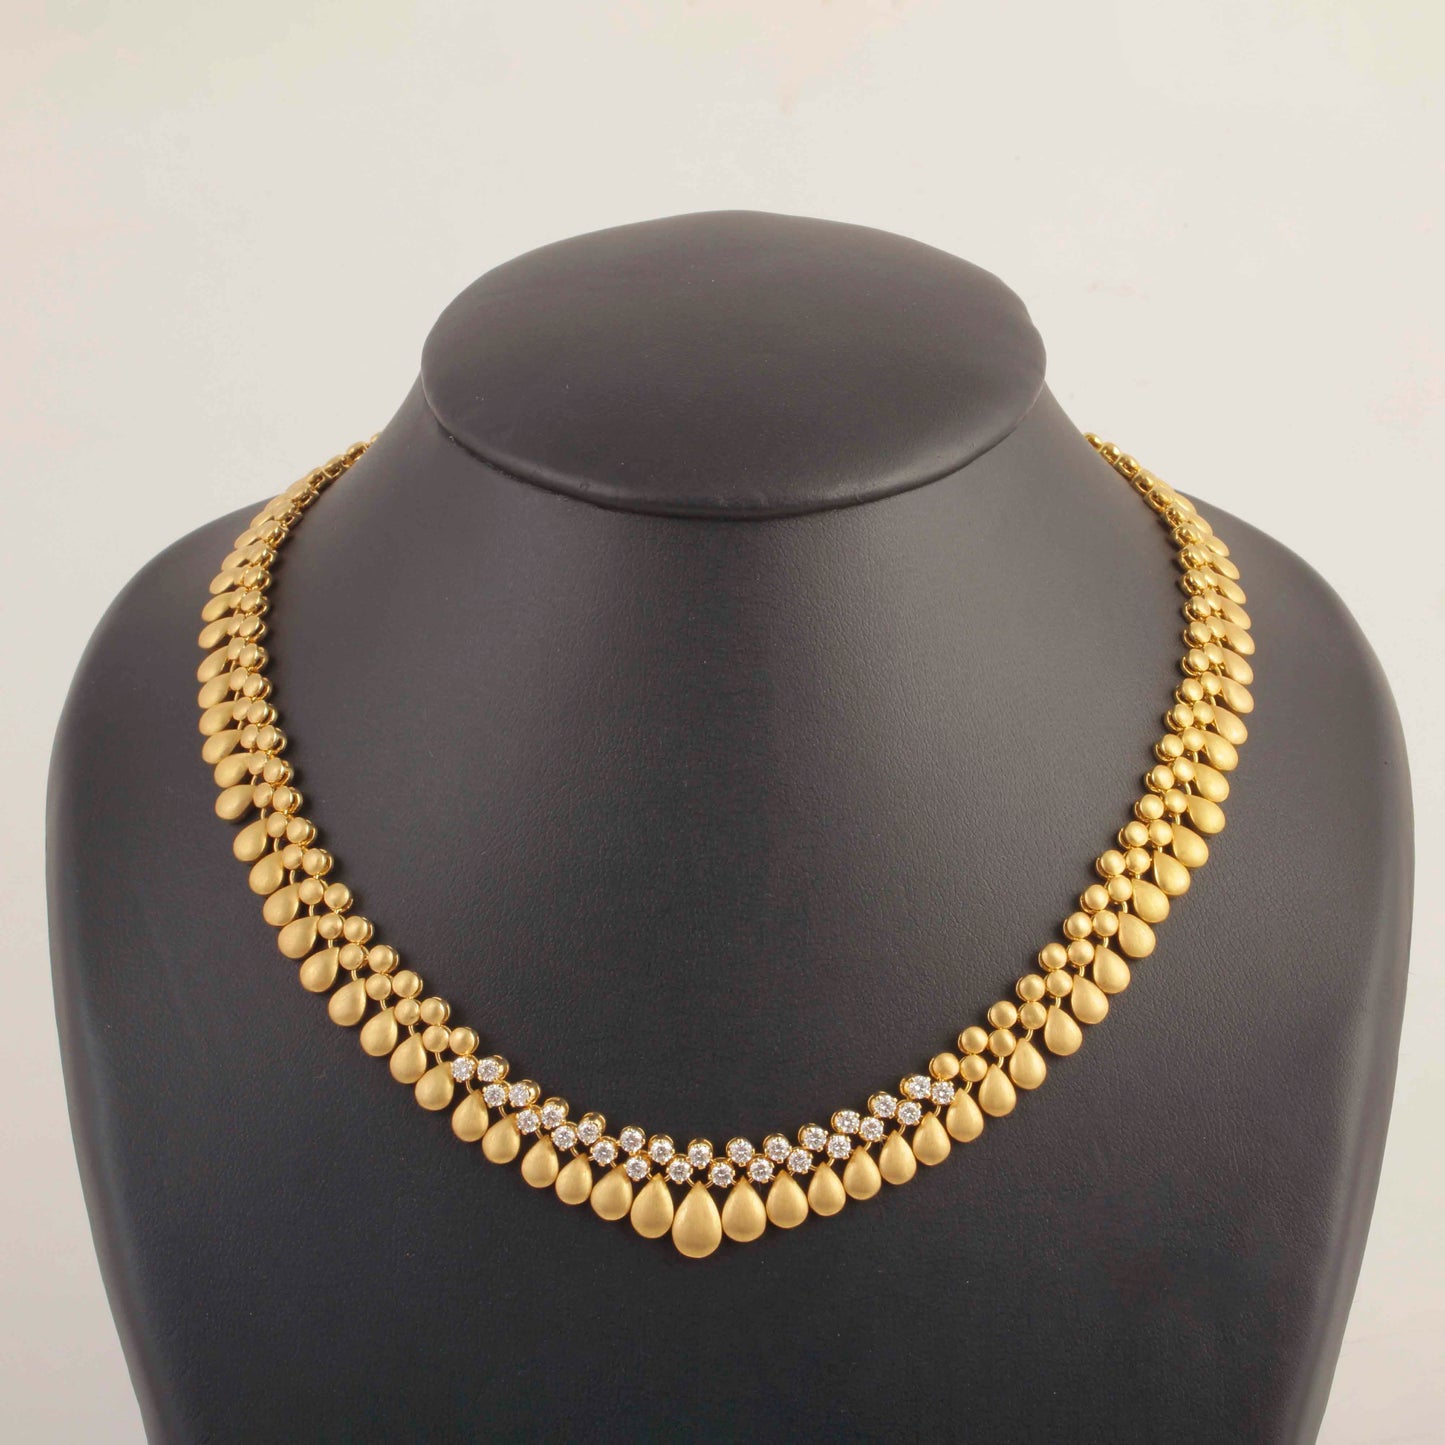 The Athulya Gold and Diamond Necklace by Rasvihar